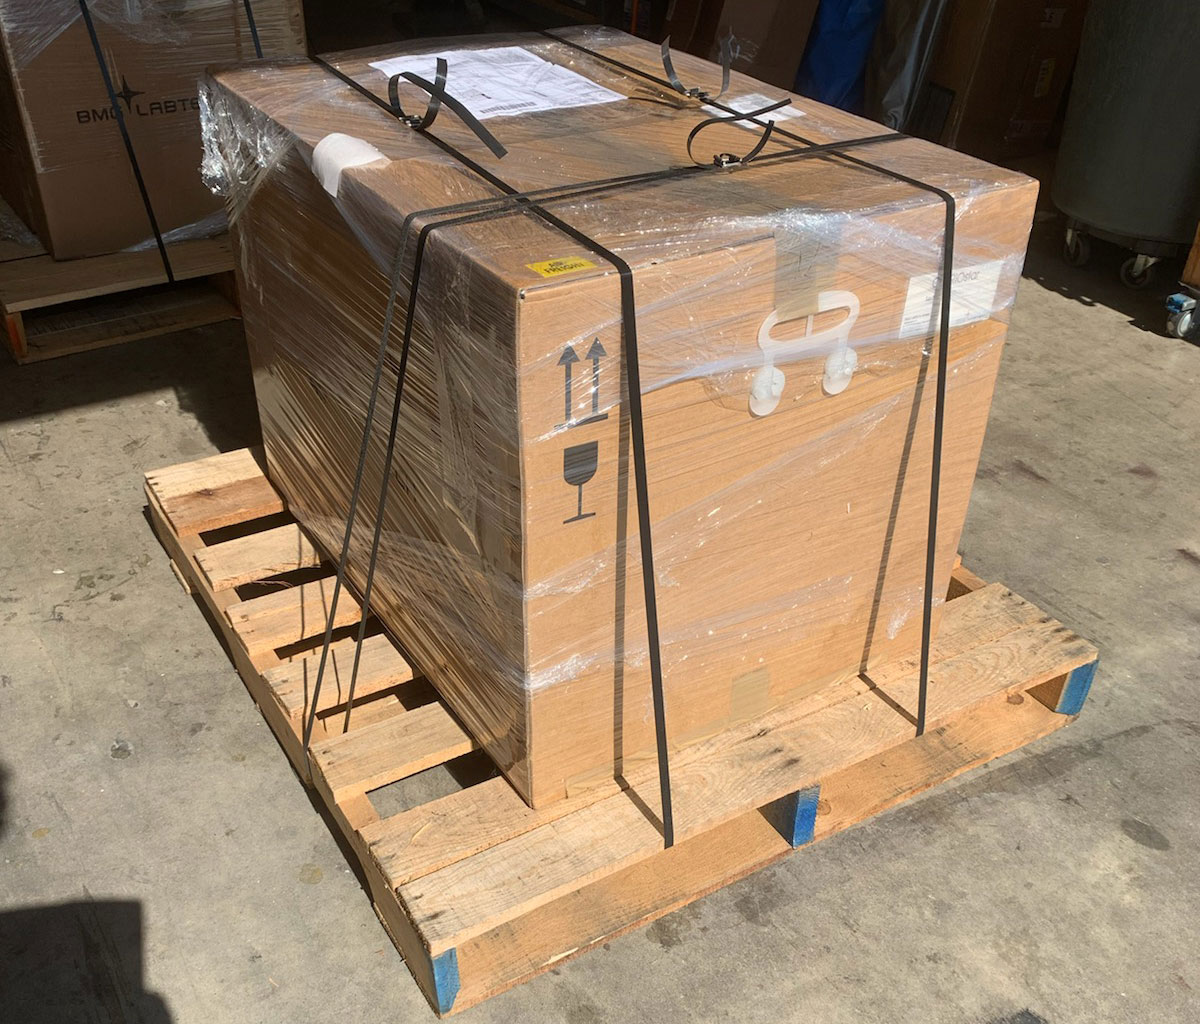 Properly packaged freight 